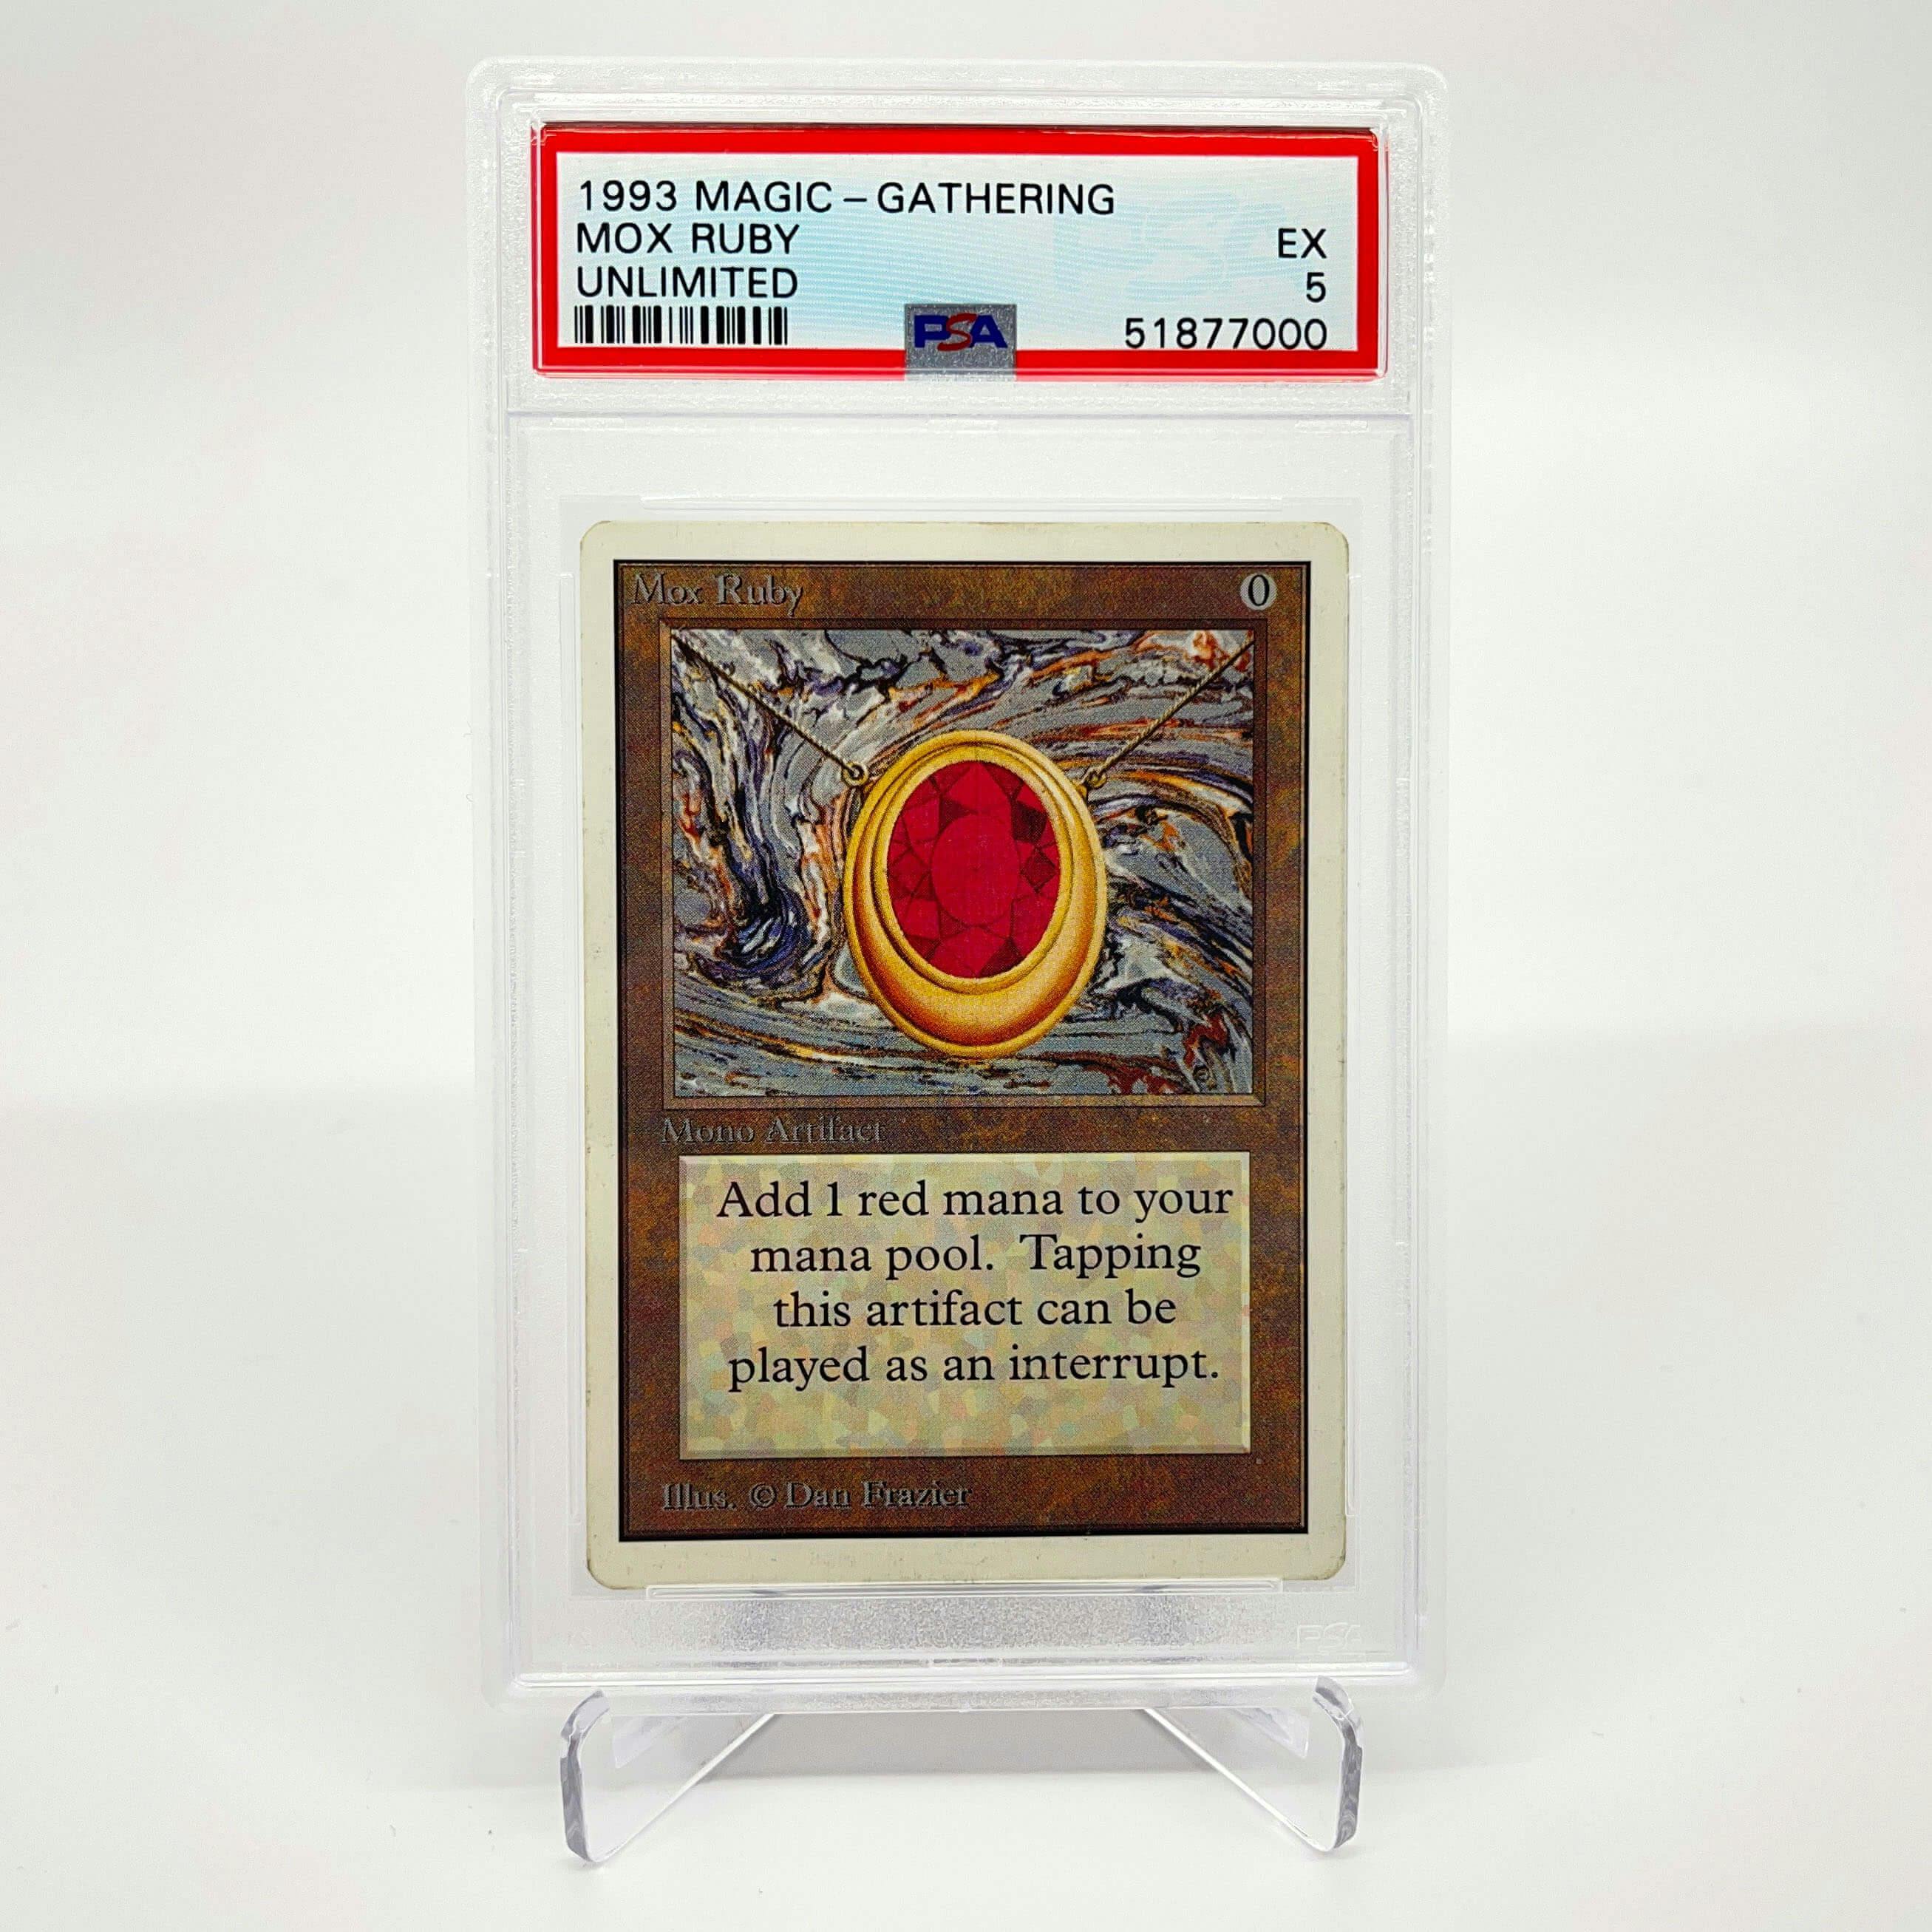 Magic: The Gathering Mox Ruby Unlimited PSA 5 EX 